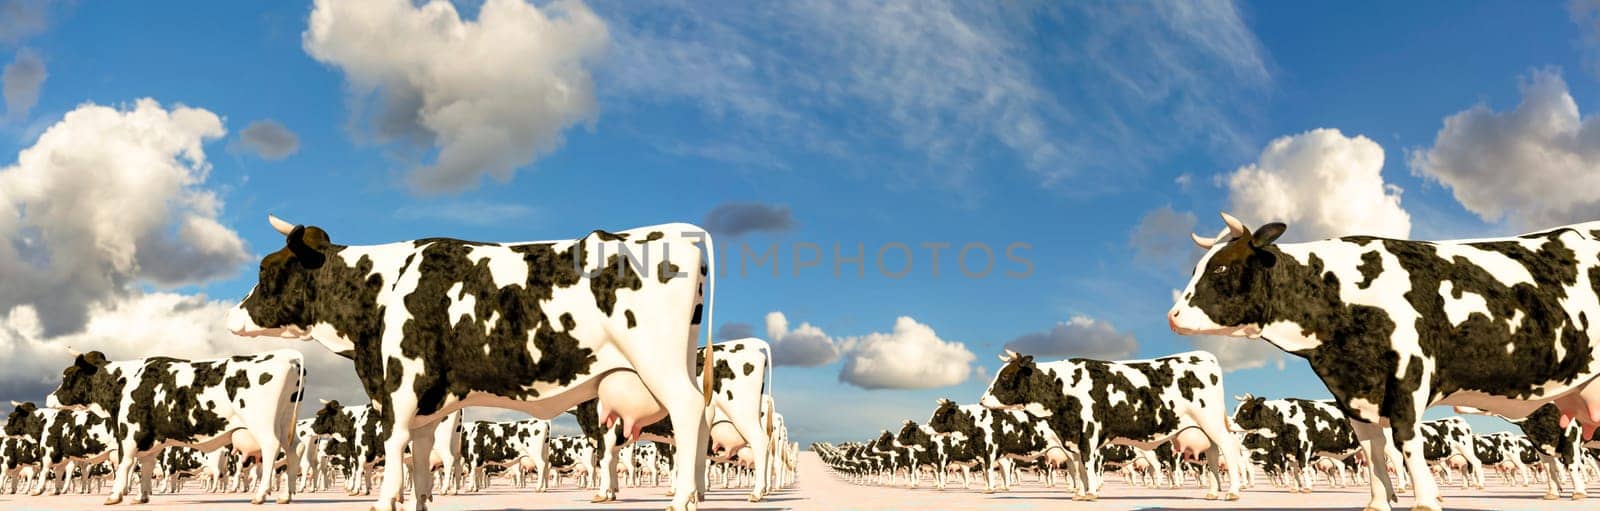 Endless Herd: Black and White Dairy Cows under a Cloudy Sky in Infinite Rows by Juanjo39